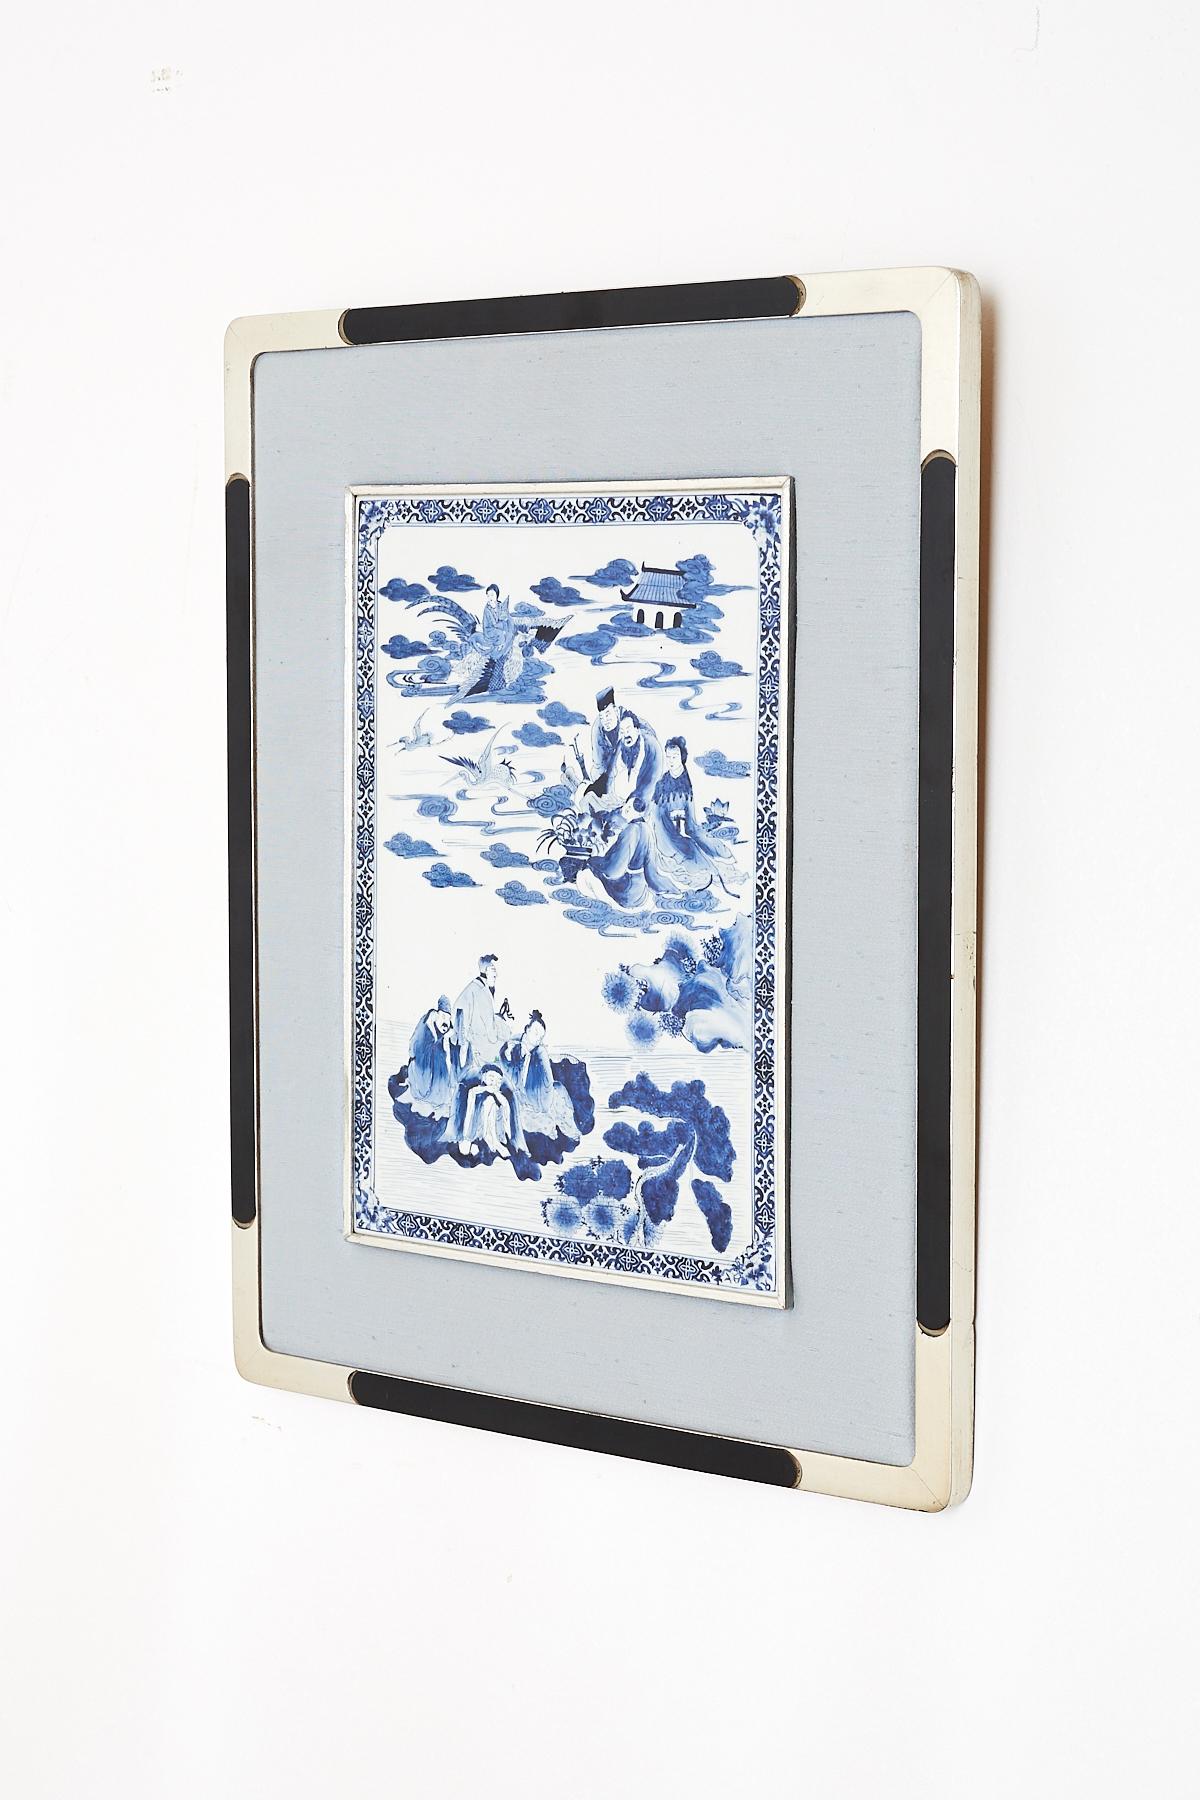 Distinctive Chinese blue and white porcelain plaque depicting deities. Features several figures in clouds with mythical birds and pagodas. Mounted to a silvered frame with a light sky blue silk border. Plaque measures 10.% inches by 14.5 inches.